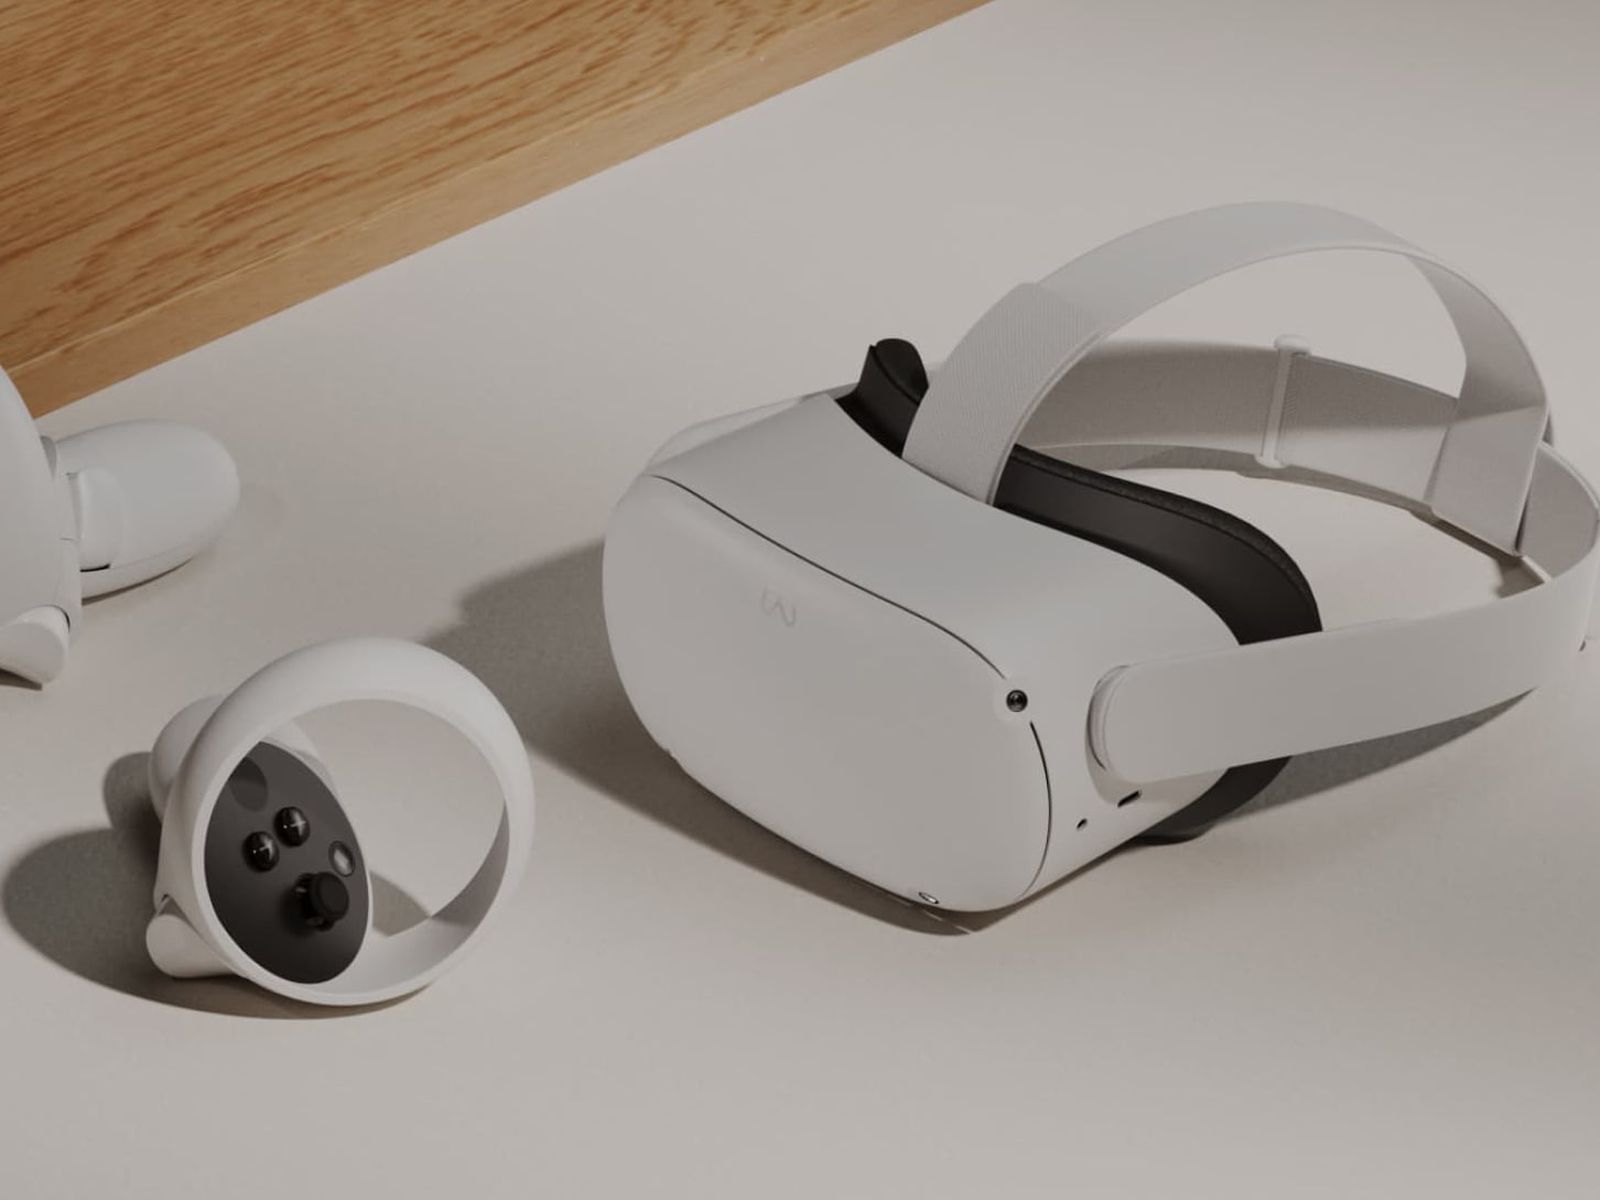 Meta is raising the price of Quest 2 virtual reality headsets by $100